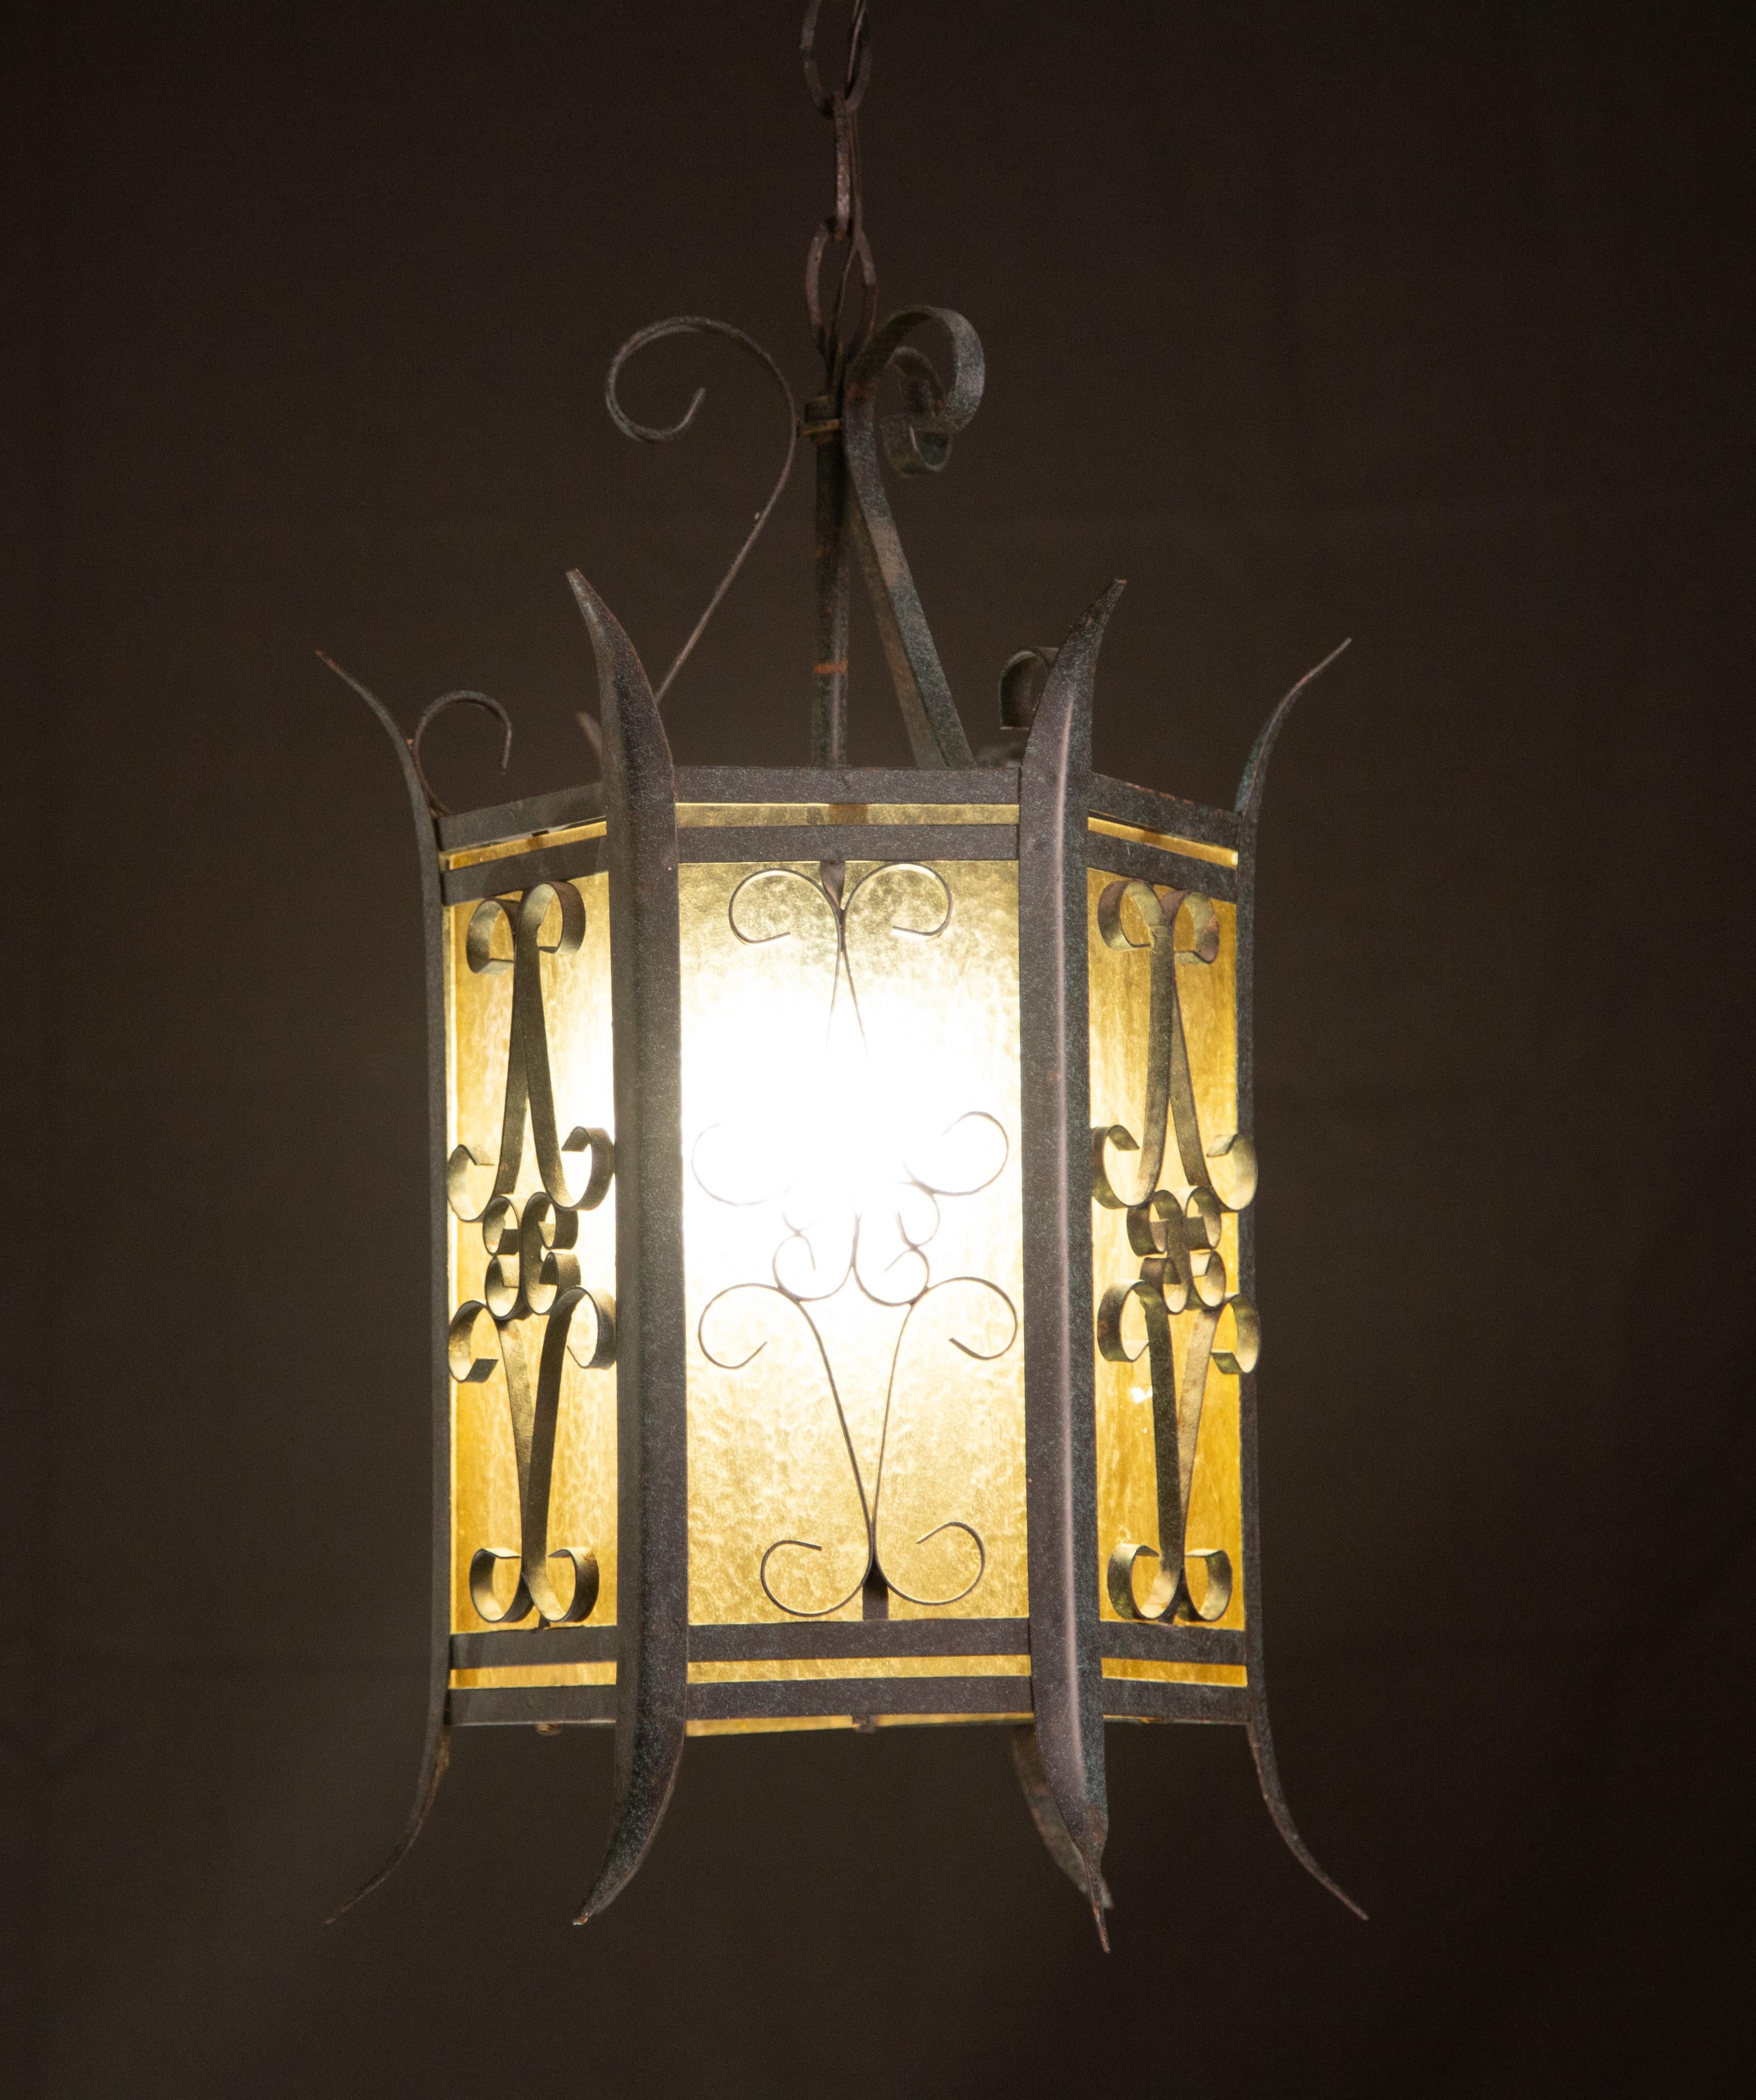 plendid Italian lantern made around the 1960s.
Measurements: 70 cm in height and 28 in diameter.
Mount a European standard e14 light.
There are signs of aging on the structure that give it a history and a certain beauty.
Perfect for decorating an